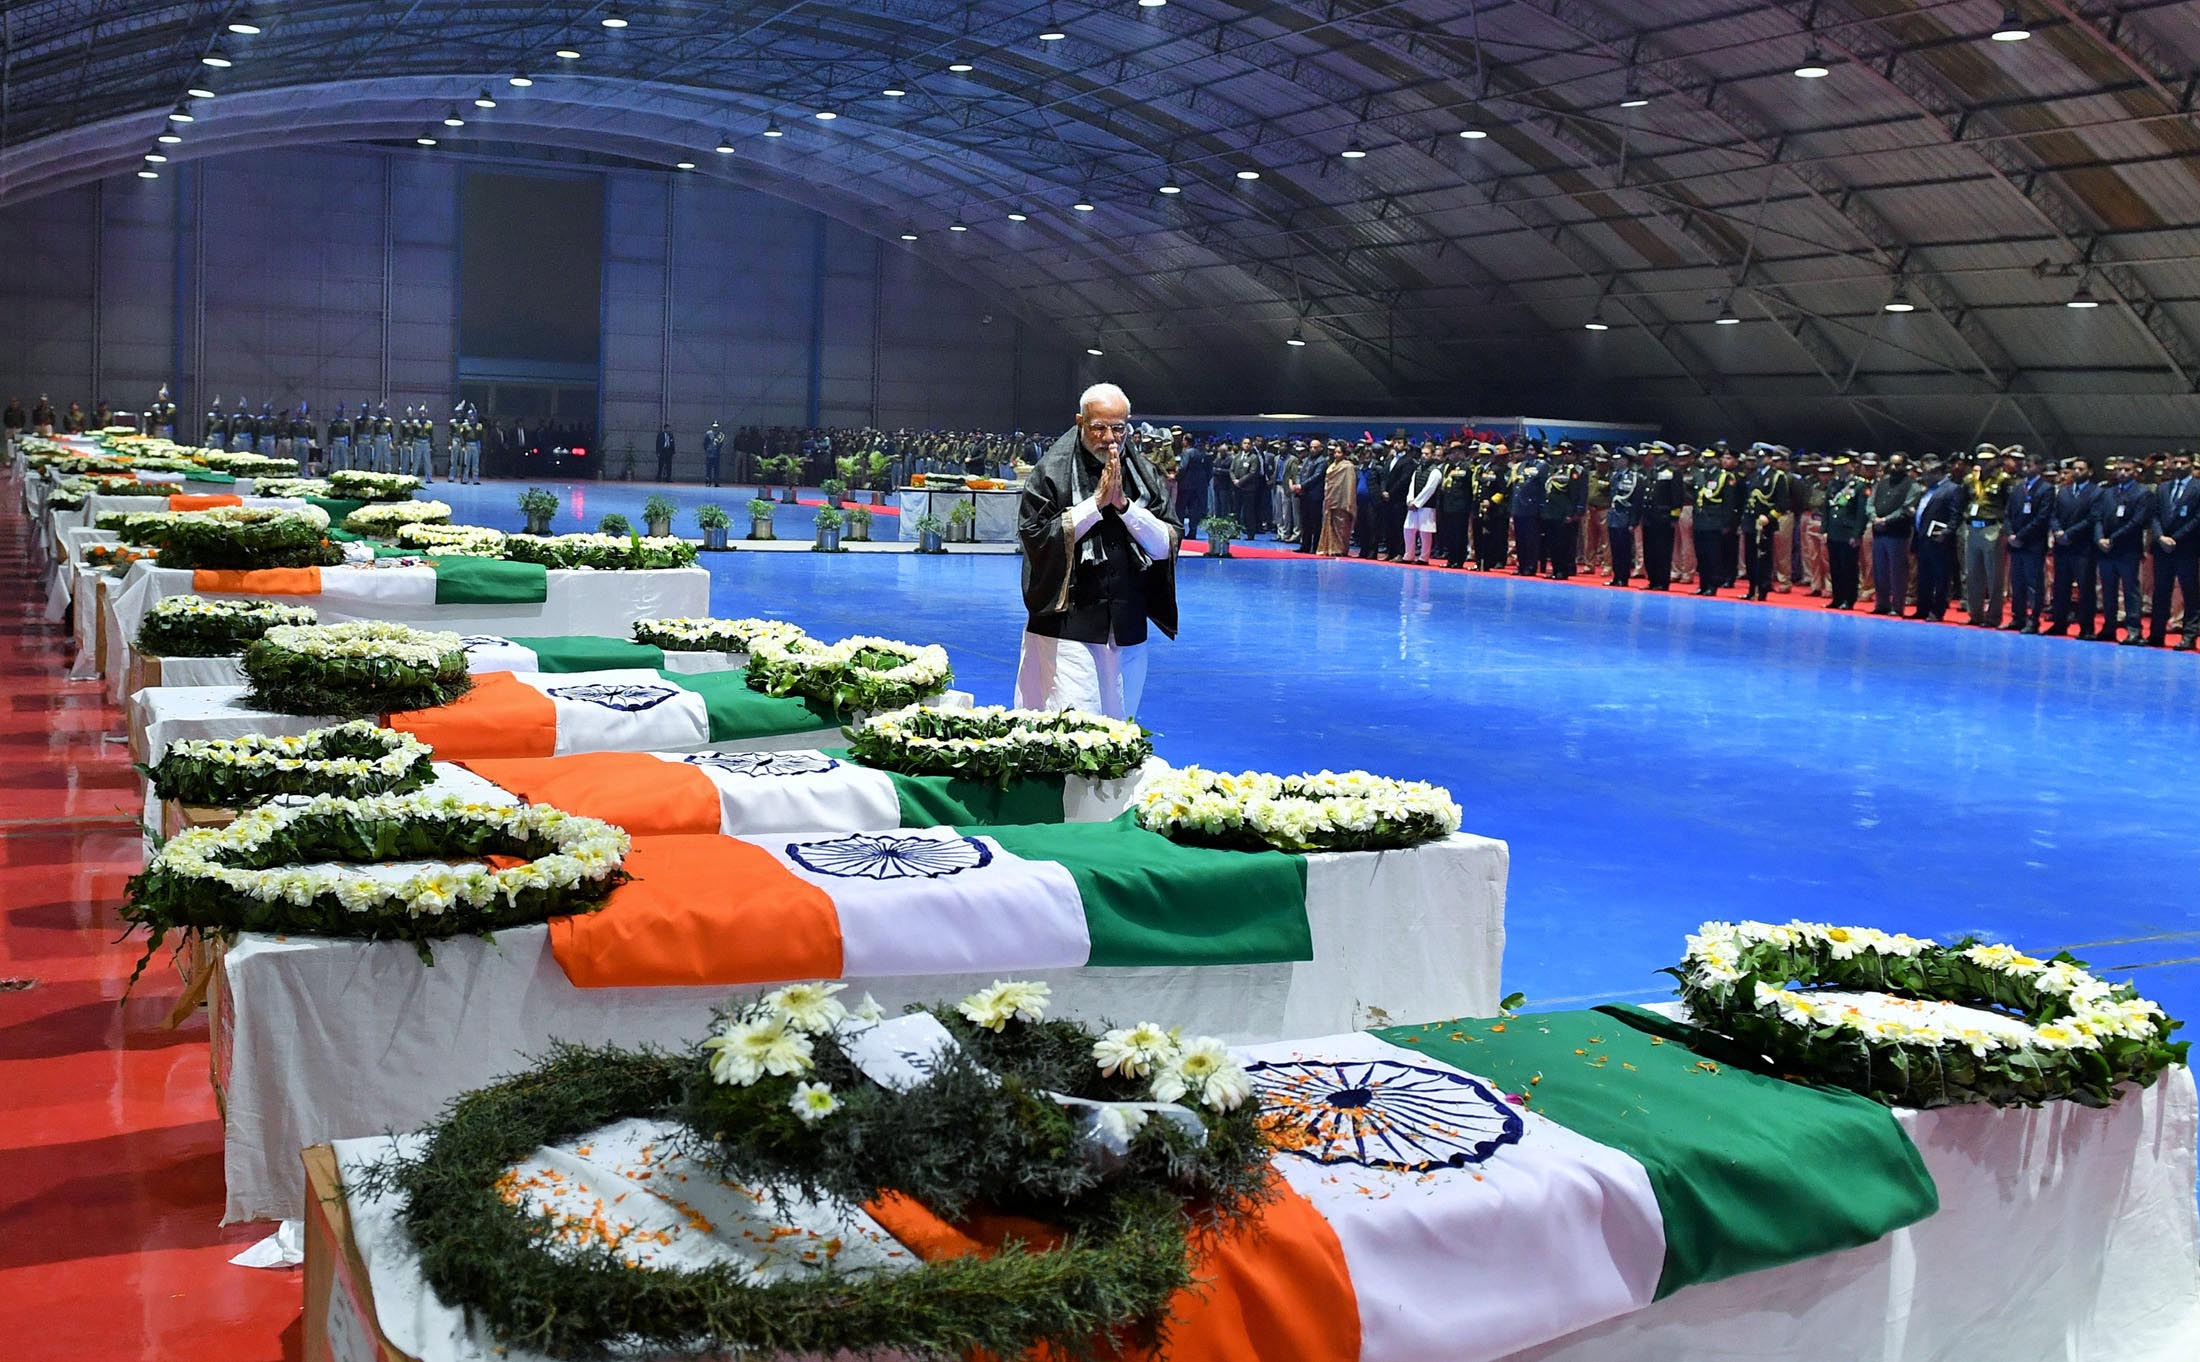 India's Prime Minister Narendra Modi pays tribute as he walks next to the coffins containing the remains of Central Reserve Police Force (CRPF) personnel who were killed after a suicide bomber rammed a car into a bus carrying them in south Kashmir on Thursday, at Palam airport in New Delhi, India, February 15, 2019. Photo: India's Press Information Bureau/Handout via REUTERS